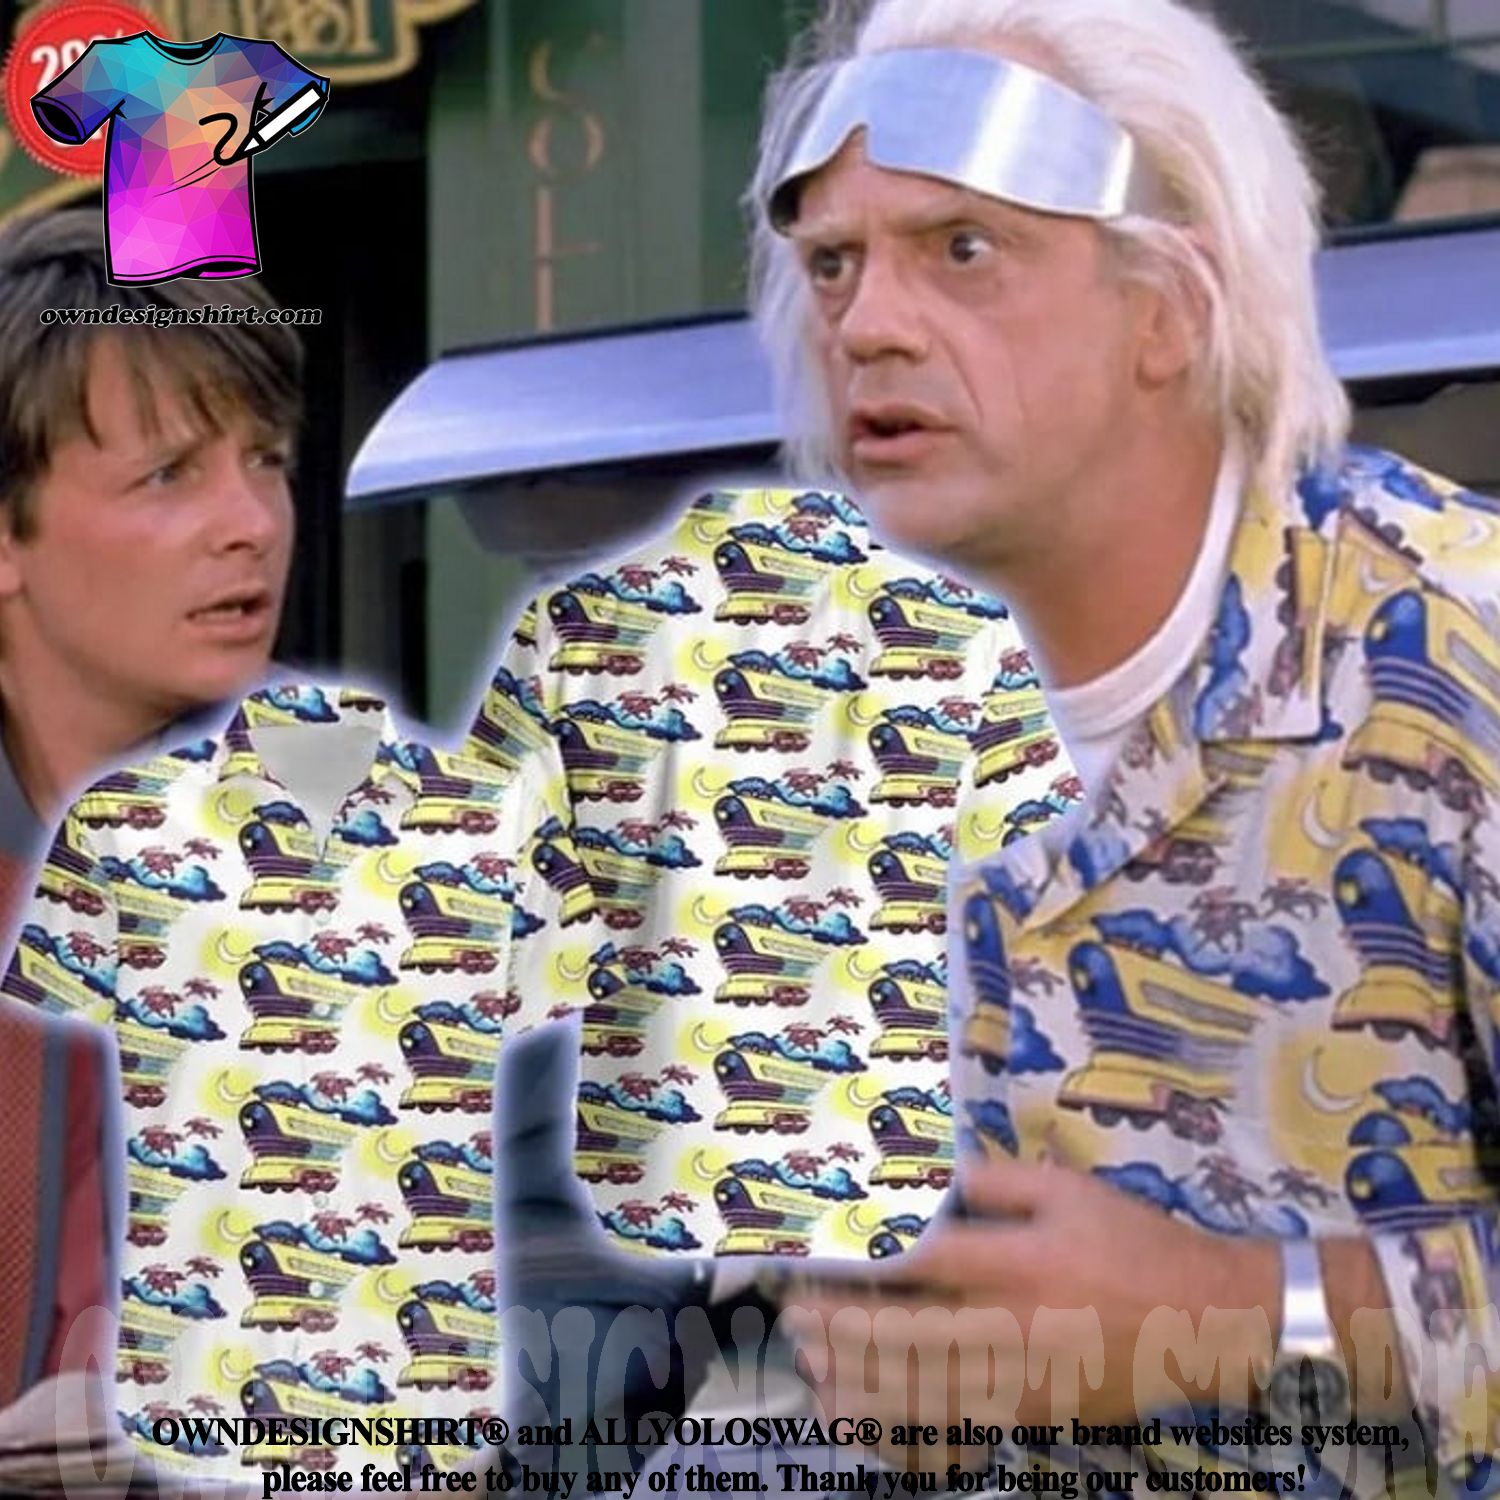 This is Back to the Future 4 happening and Back to the Future Hawaiian shirt